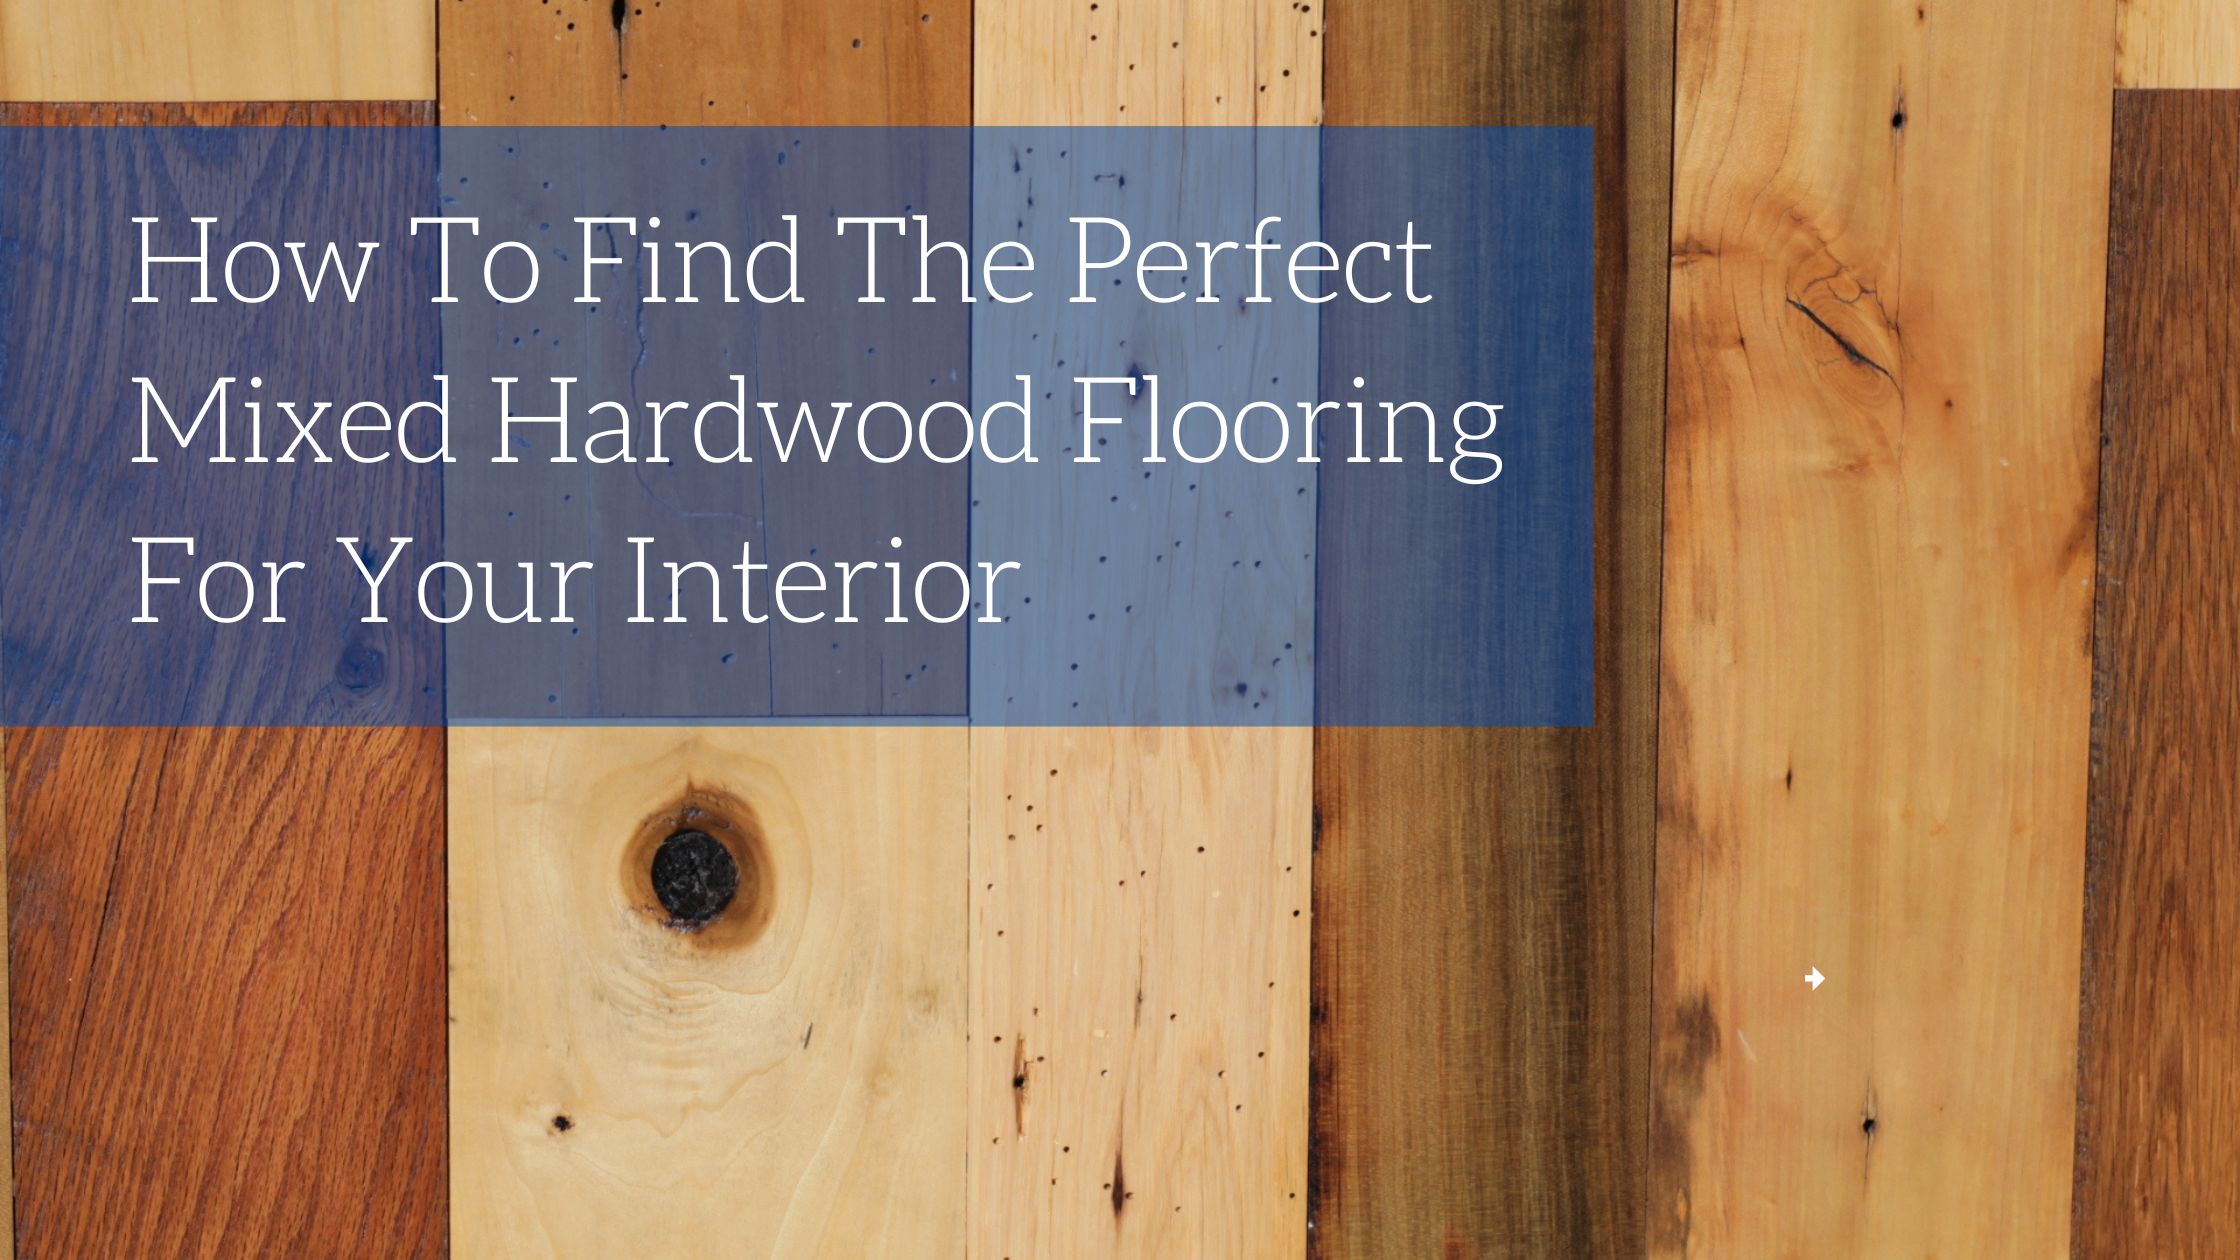 How To Find The Perfect Mixed Hardwood Flooring For Your Interior